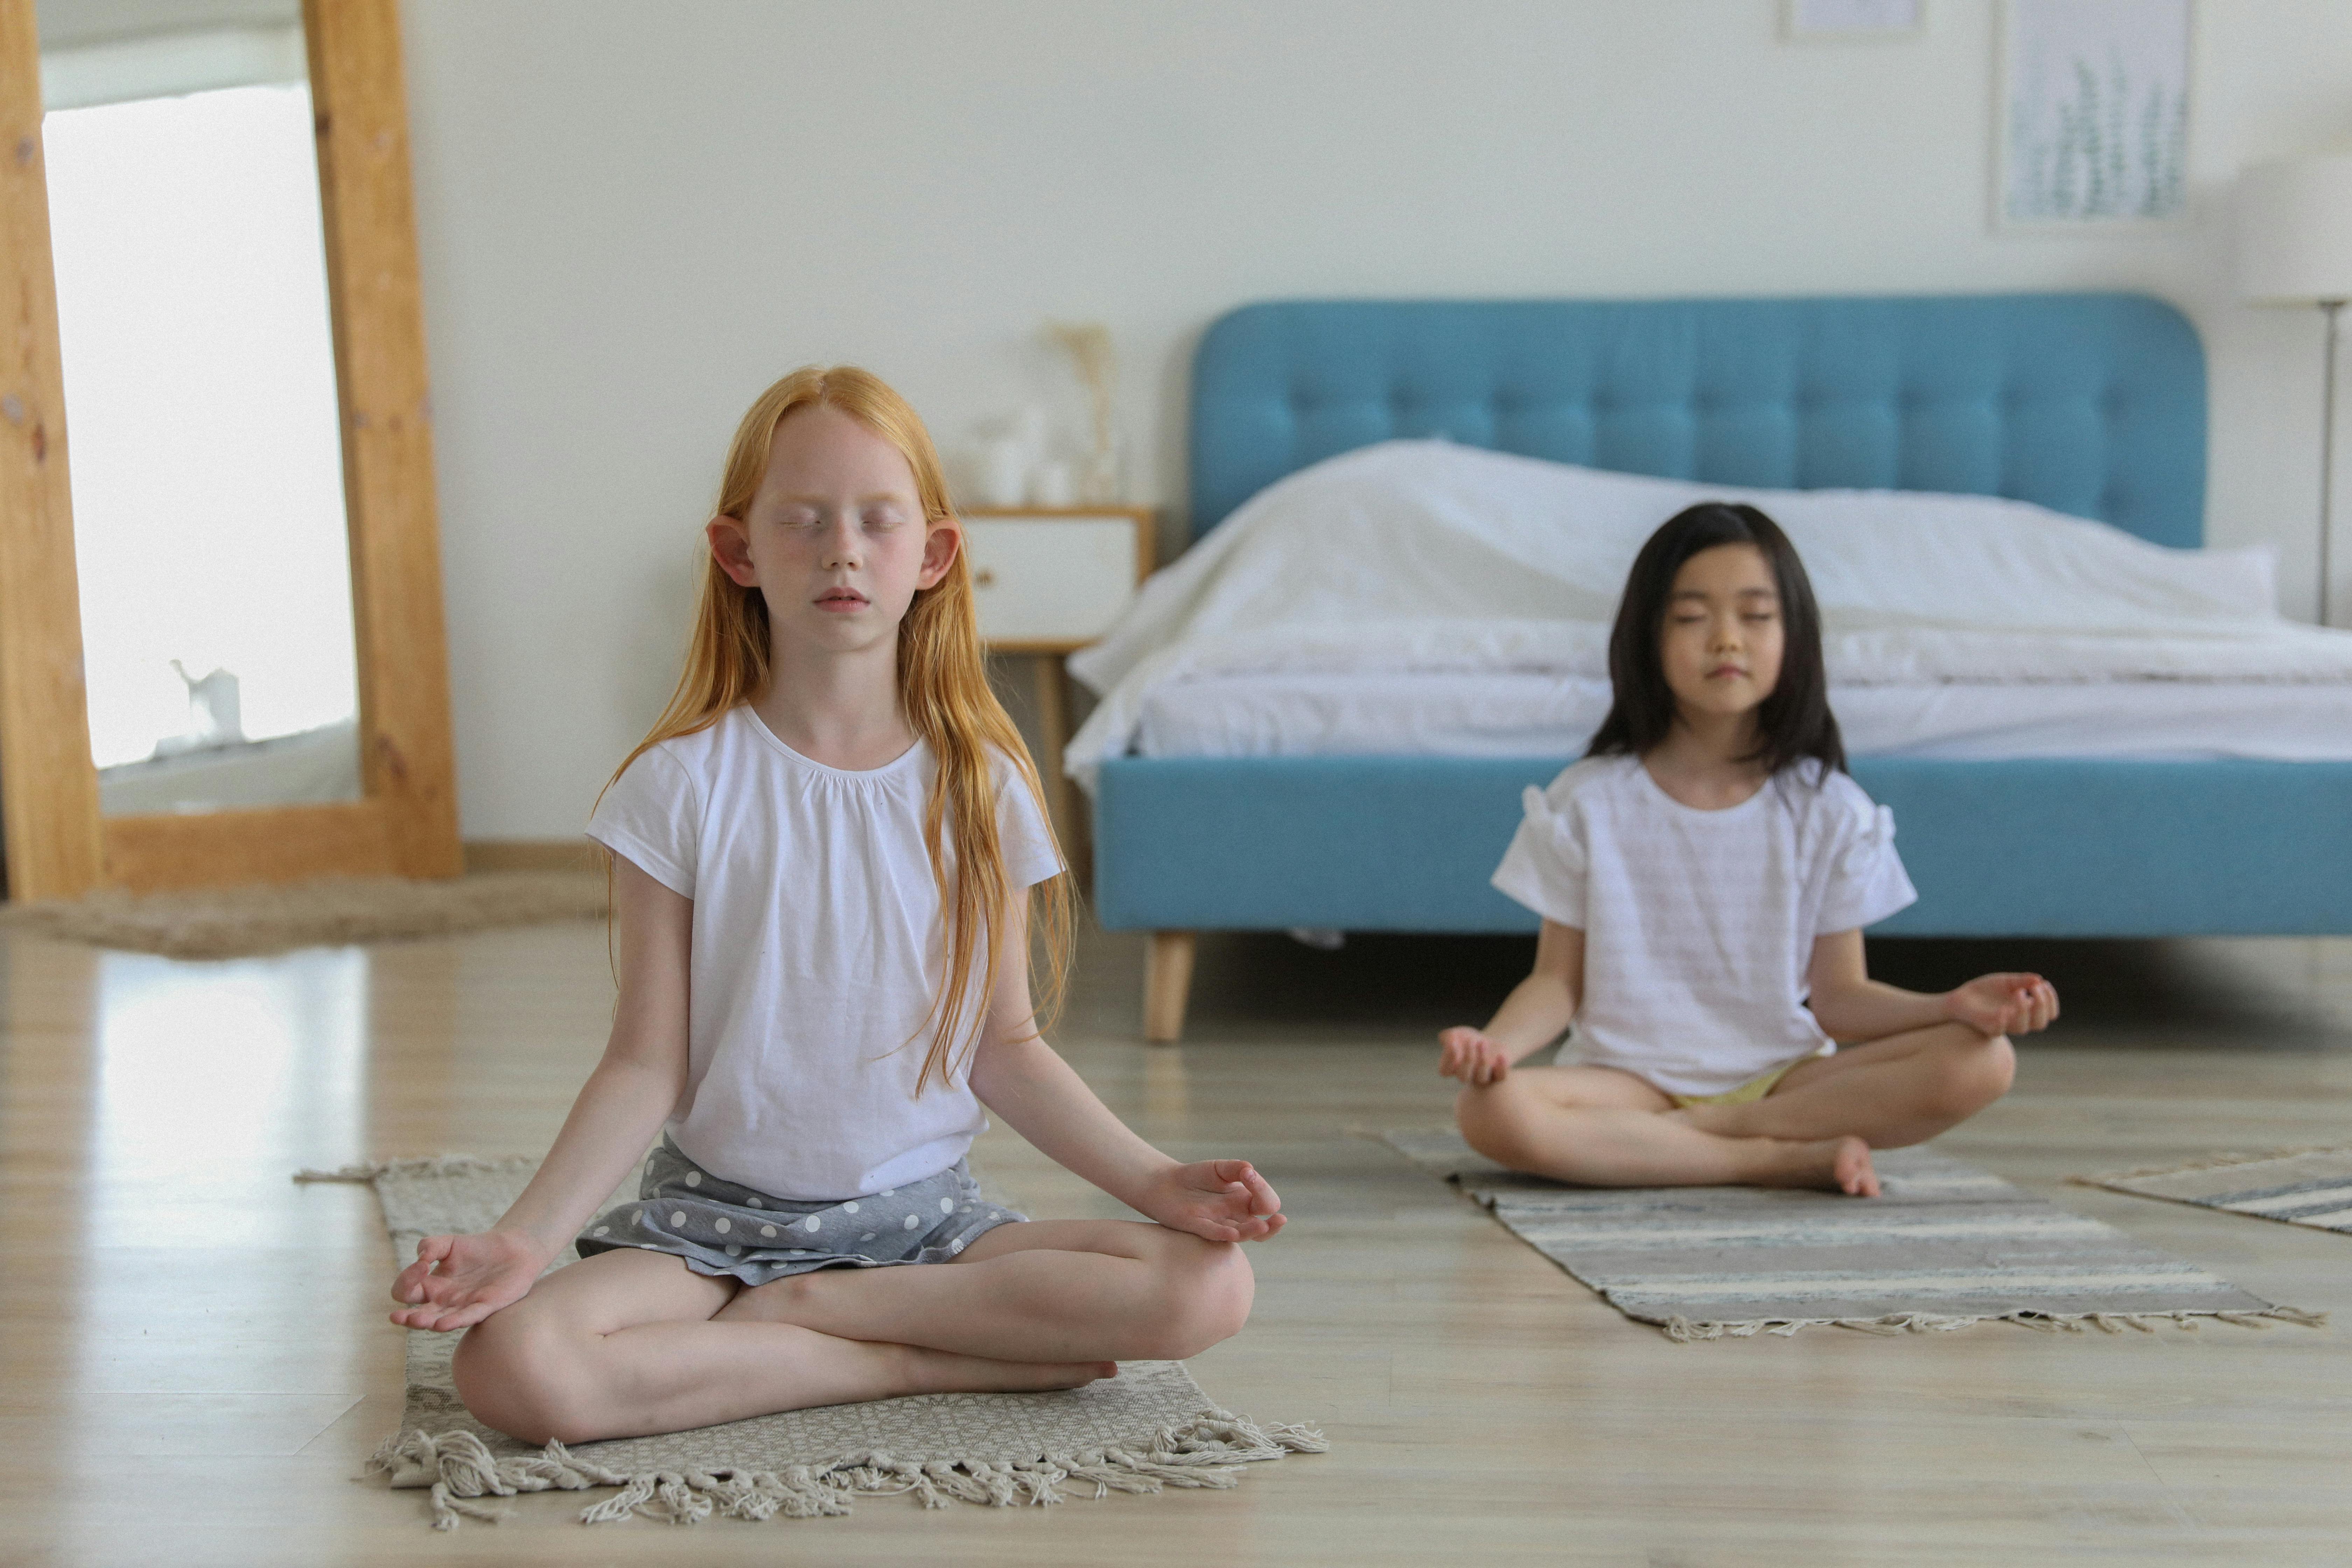  Introducing Mindfulness to Children: Techniques and Benefits